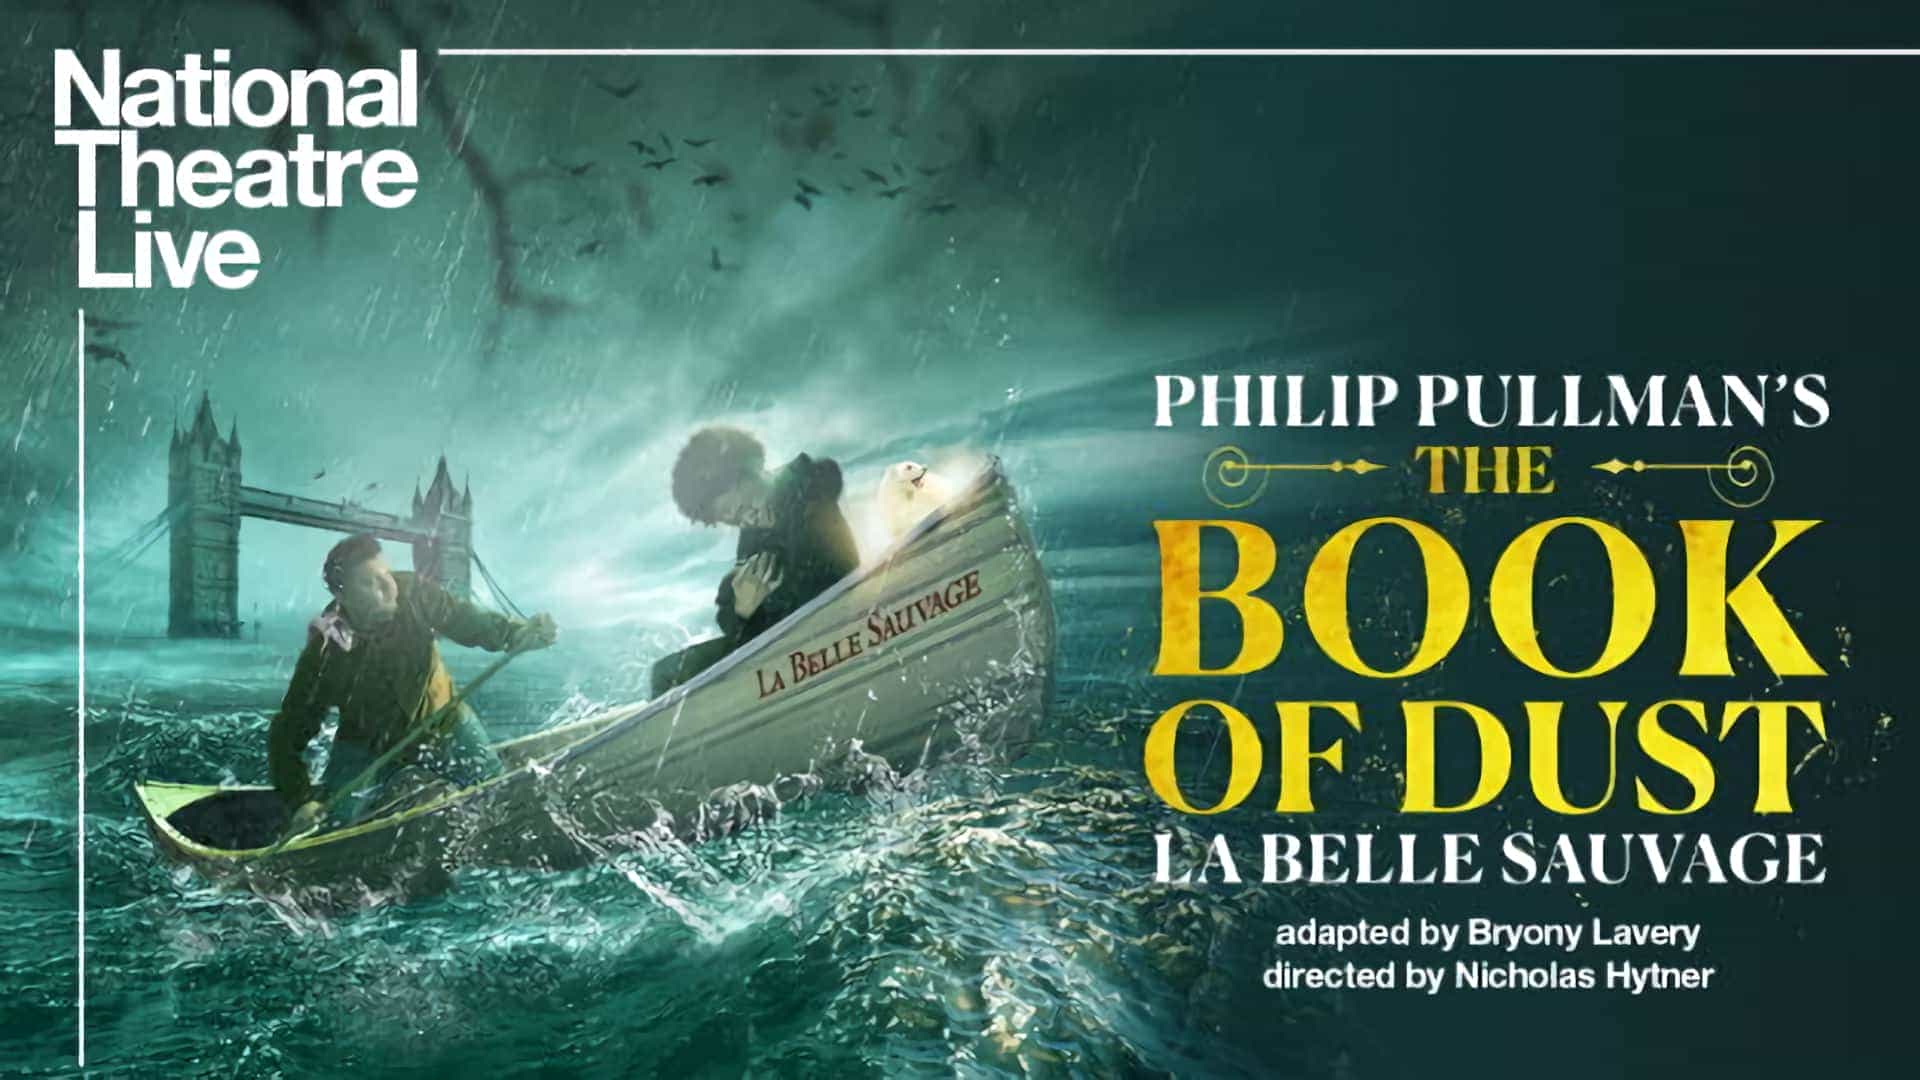 National Theatre Live - The Book of Dust - La Belle Sauvage (12A)